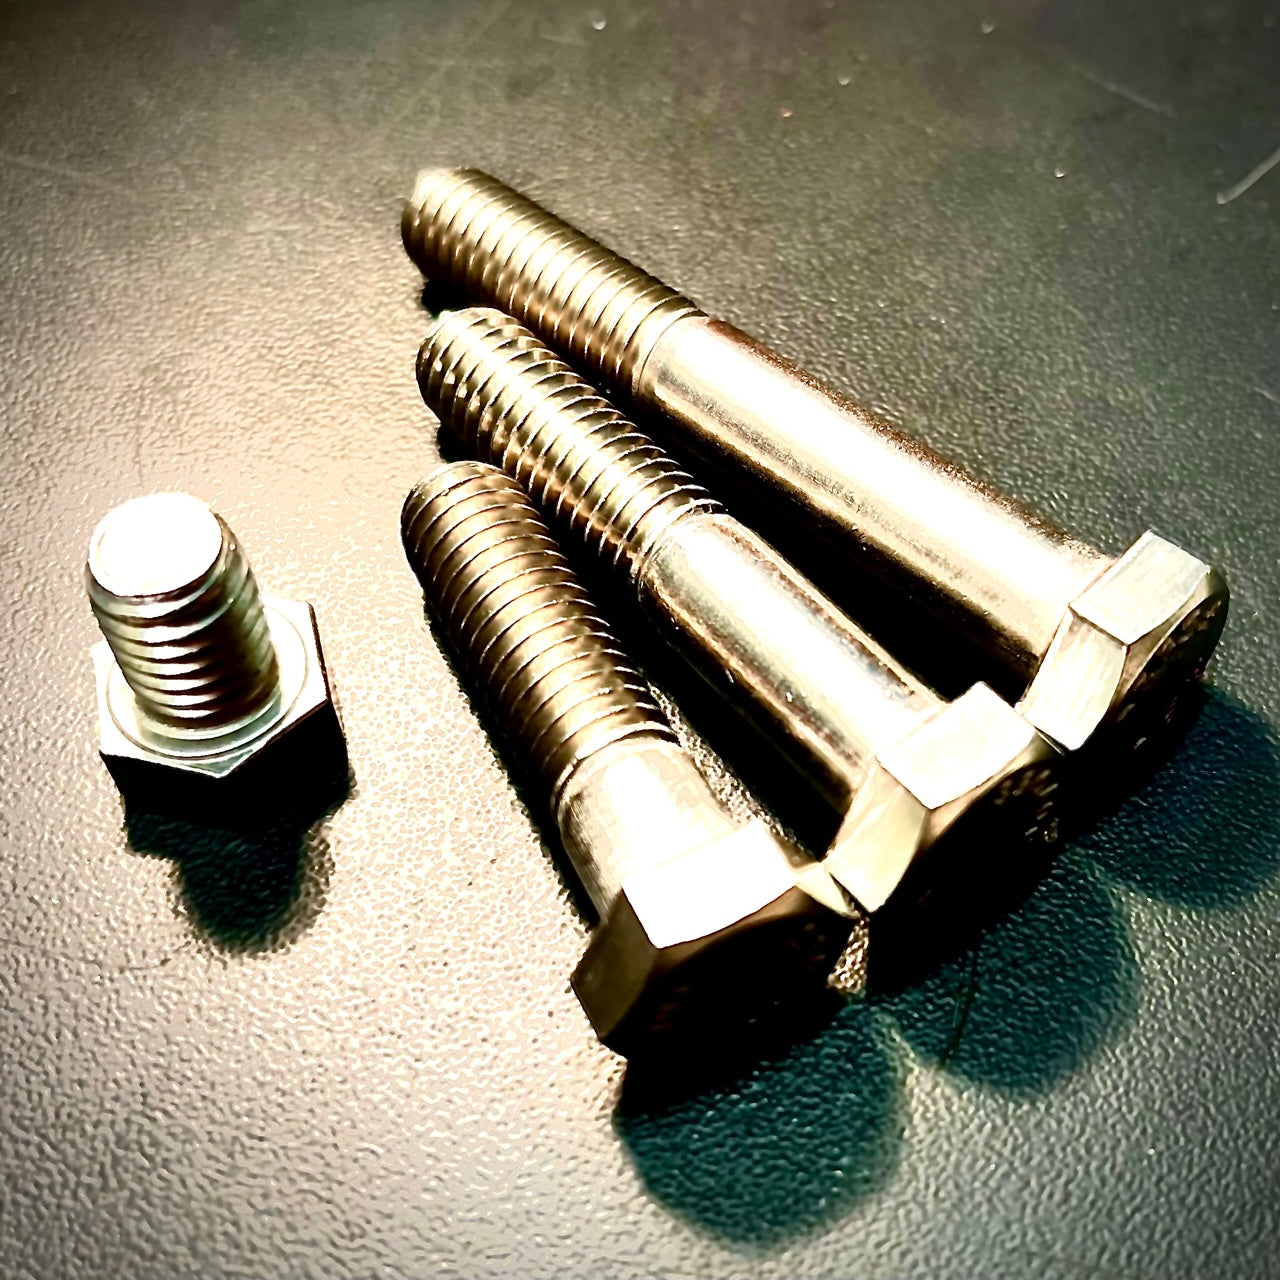 UNC 3/8"Hex Bolt and Set Screws A2 304 Stainless Steel DIN931 - Fixaball Ltd. Fixings and Fasteners UK